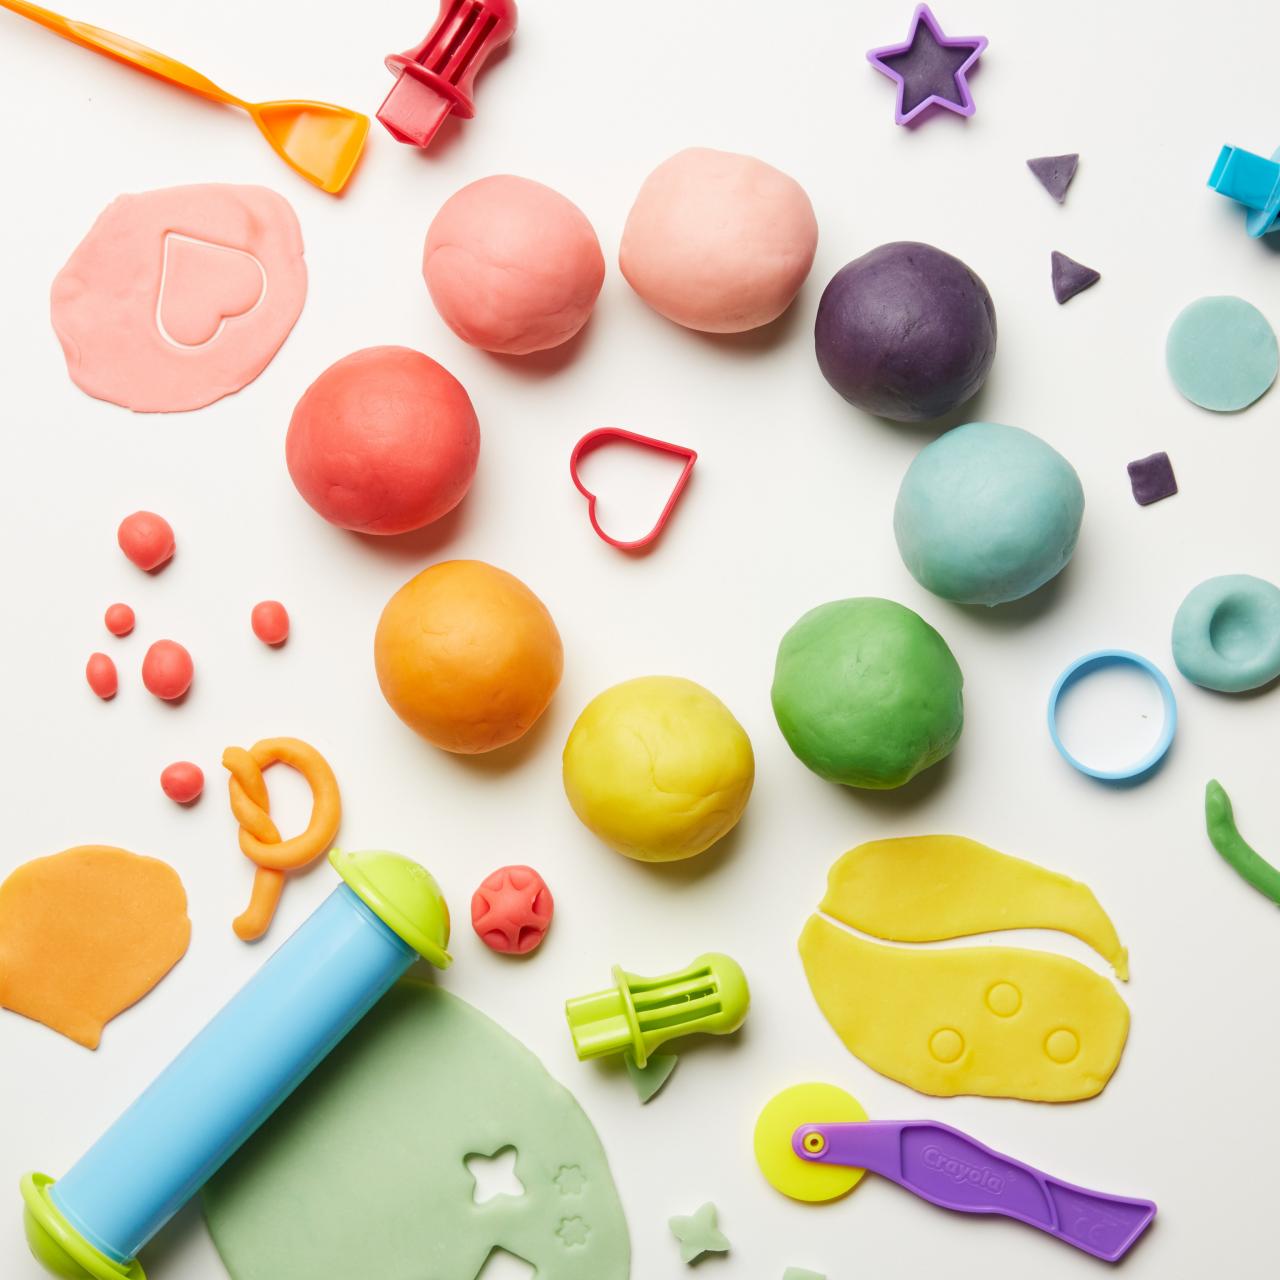 Taste-Safe Playdough Recipe for Babies and Toddlers - Happy